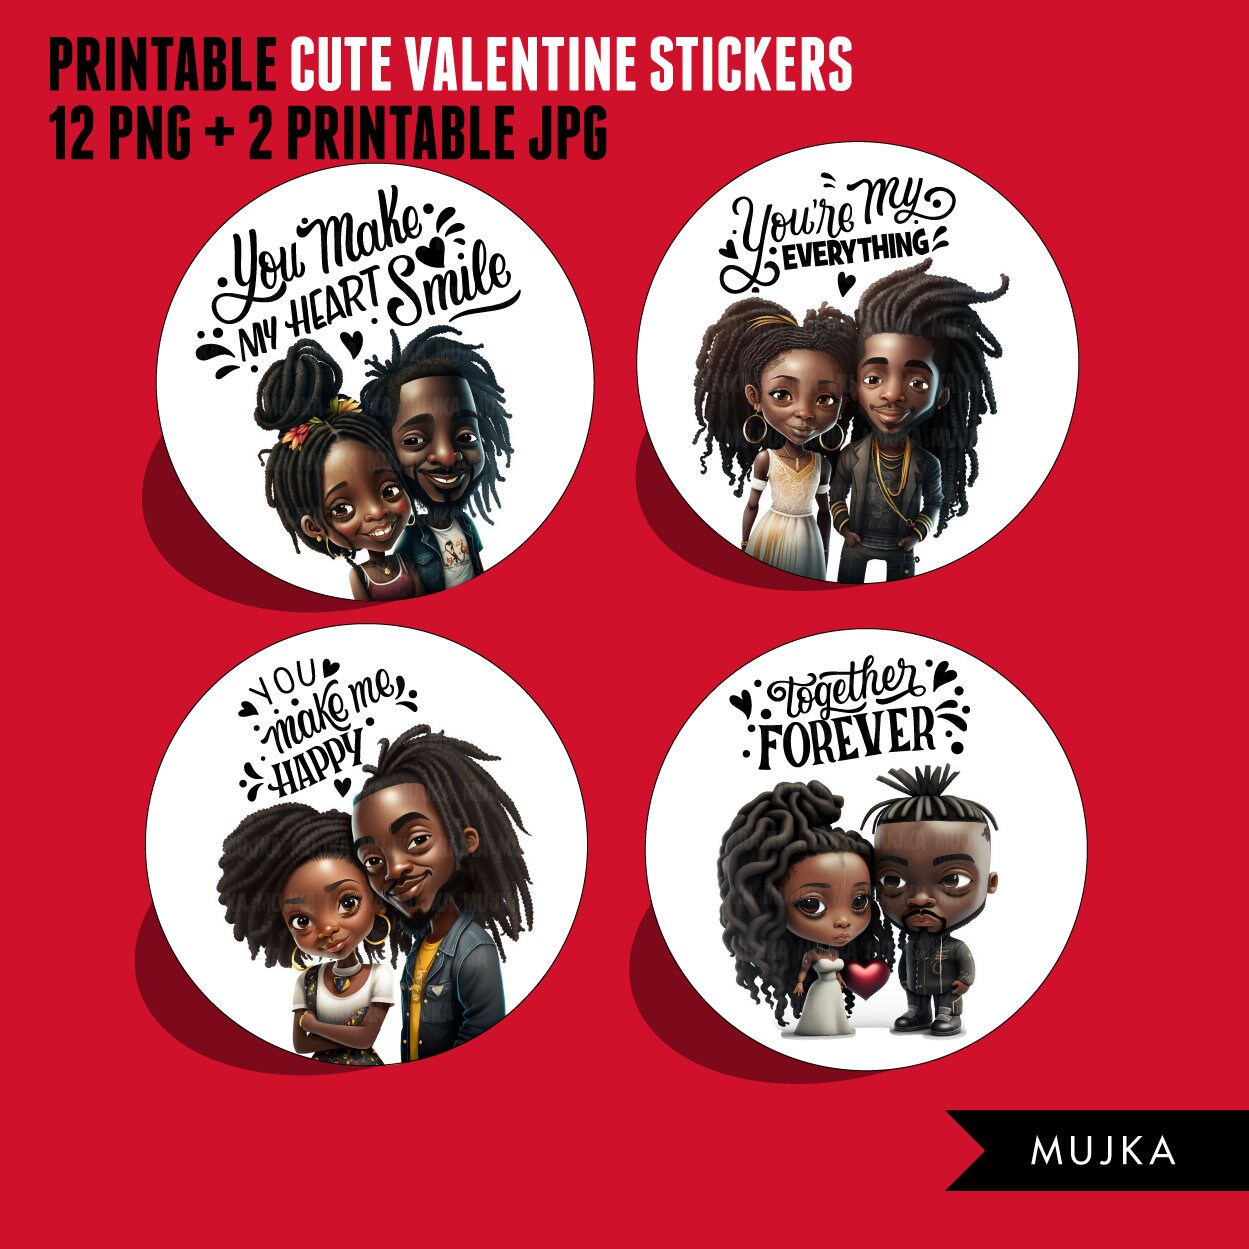 Valentine's Day stickers, Cute black couples stickers, couples png, valentine clipart, valentine, printable stickers, valentines day gifts